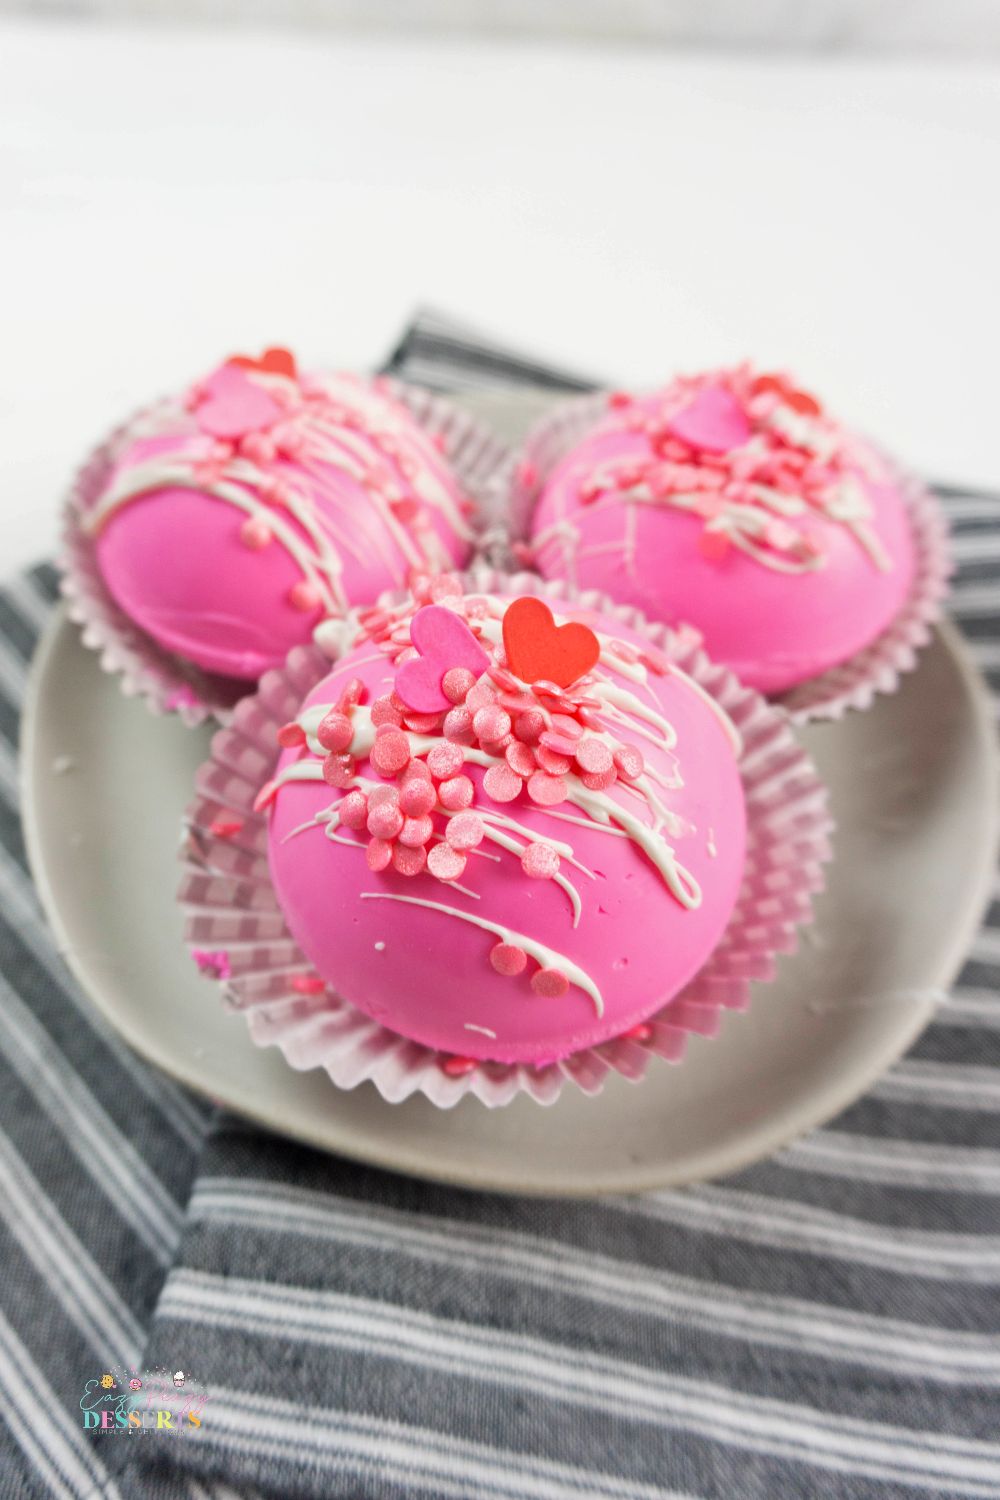 Image of three pink strawberry chocolate bombs on a dessert plate